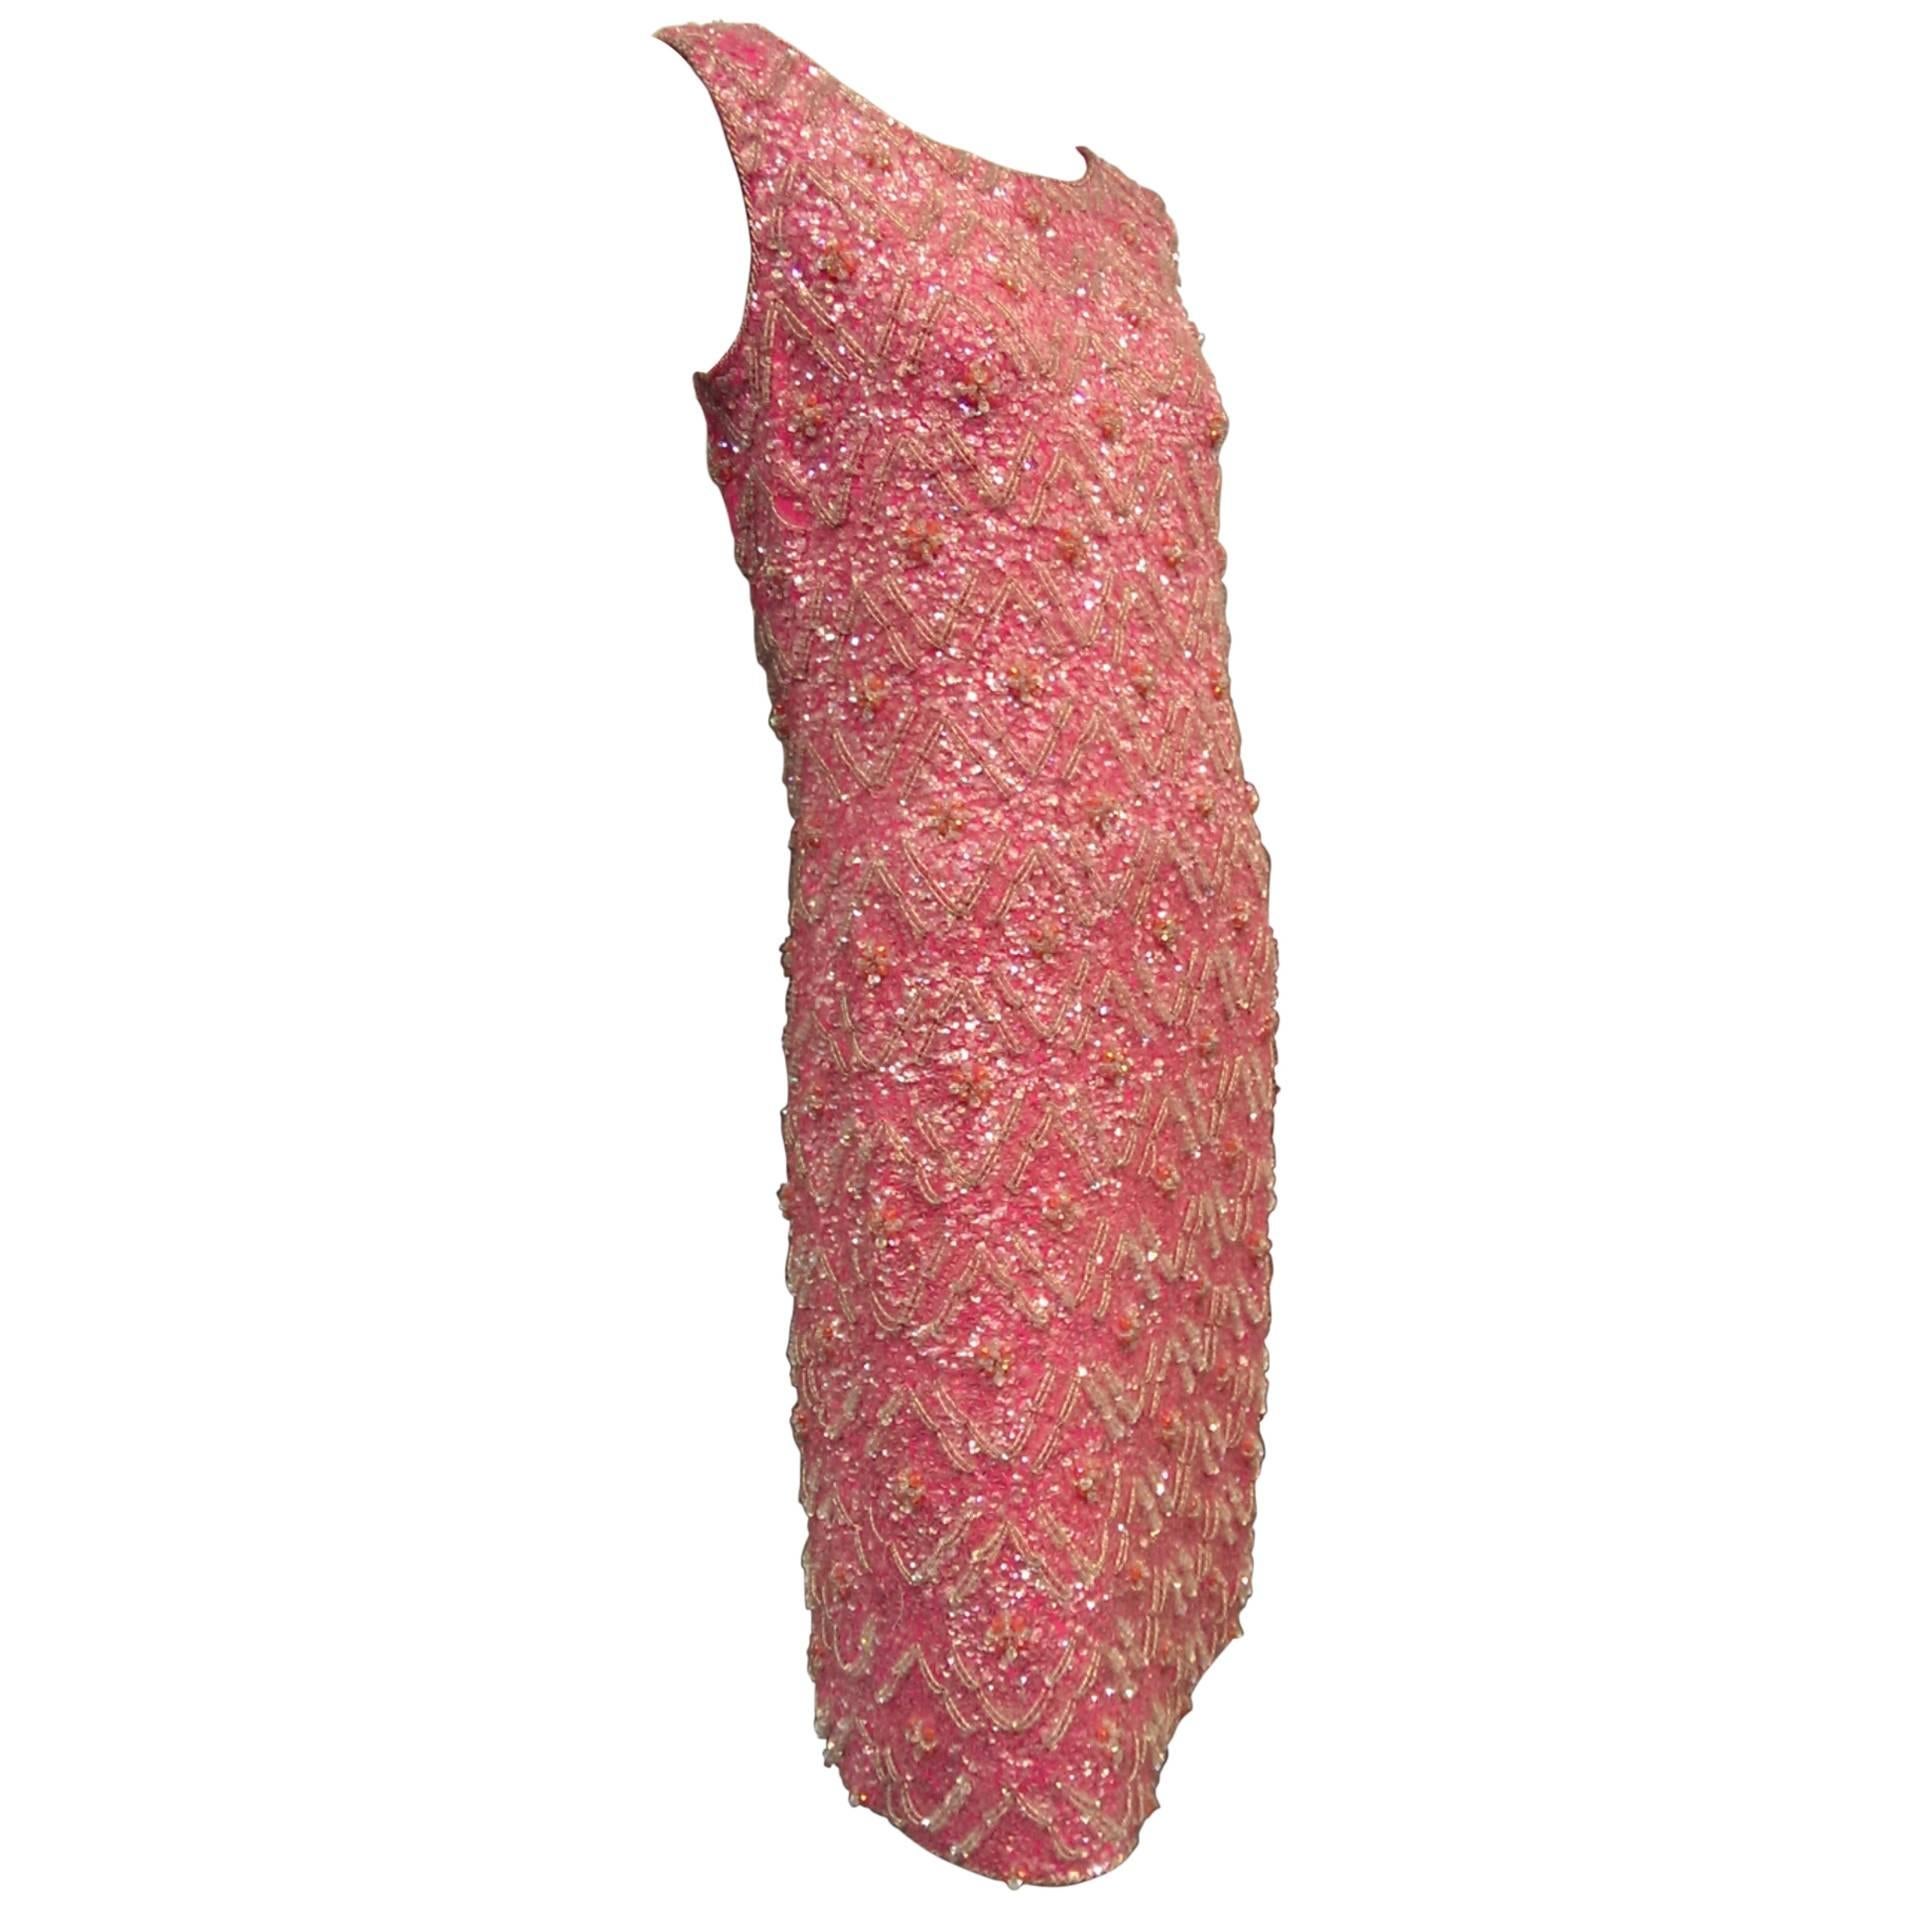 1960s I. Magnin Vibrant Pink Wool Knit Dress w Heavy Beads and Sequins